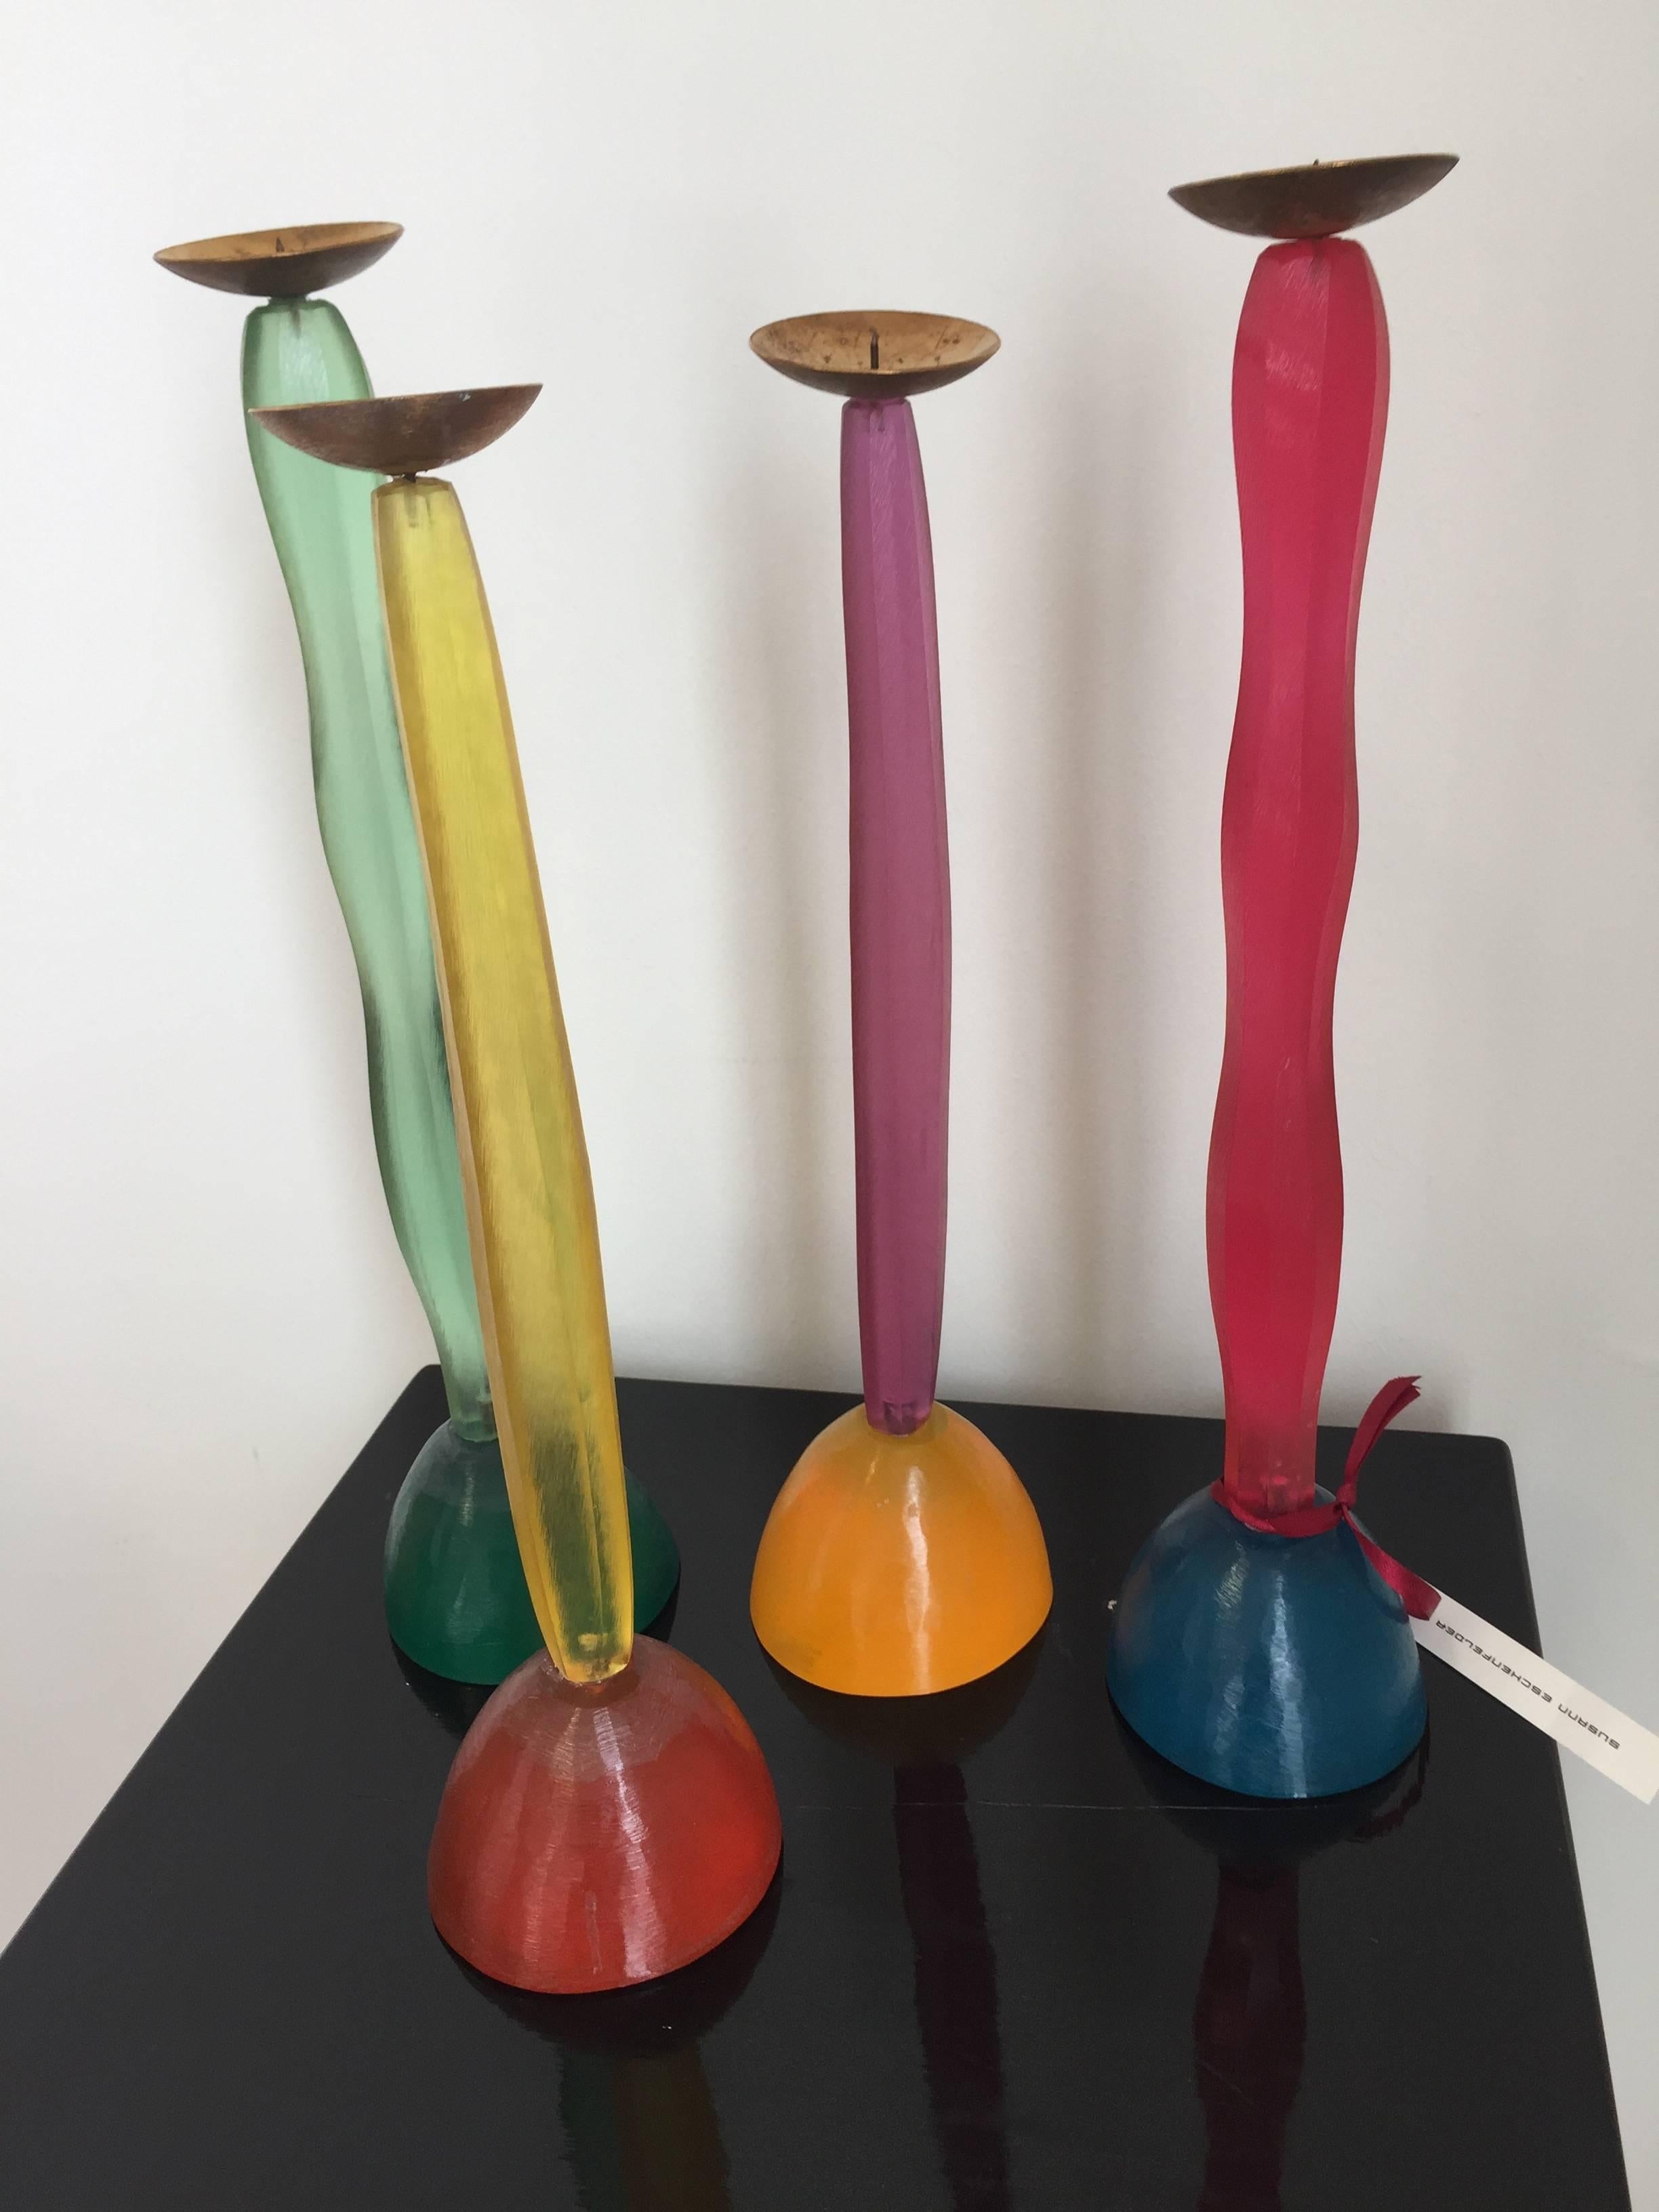 Four no of multicolored candlesticks, creator Migeon et Migeon, translucent colored Resin, Signed by hand on the bottom, manufactured by hand,
Size of each candlestick is slightly different, 9cm Diameter on the Bottom x about 36cm to 39cm height,